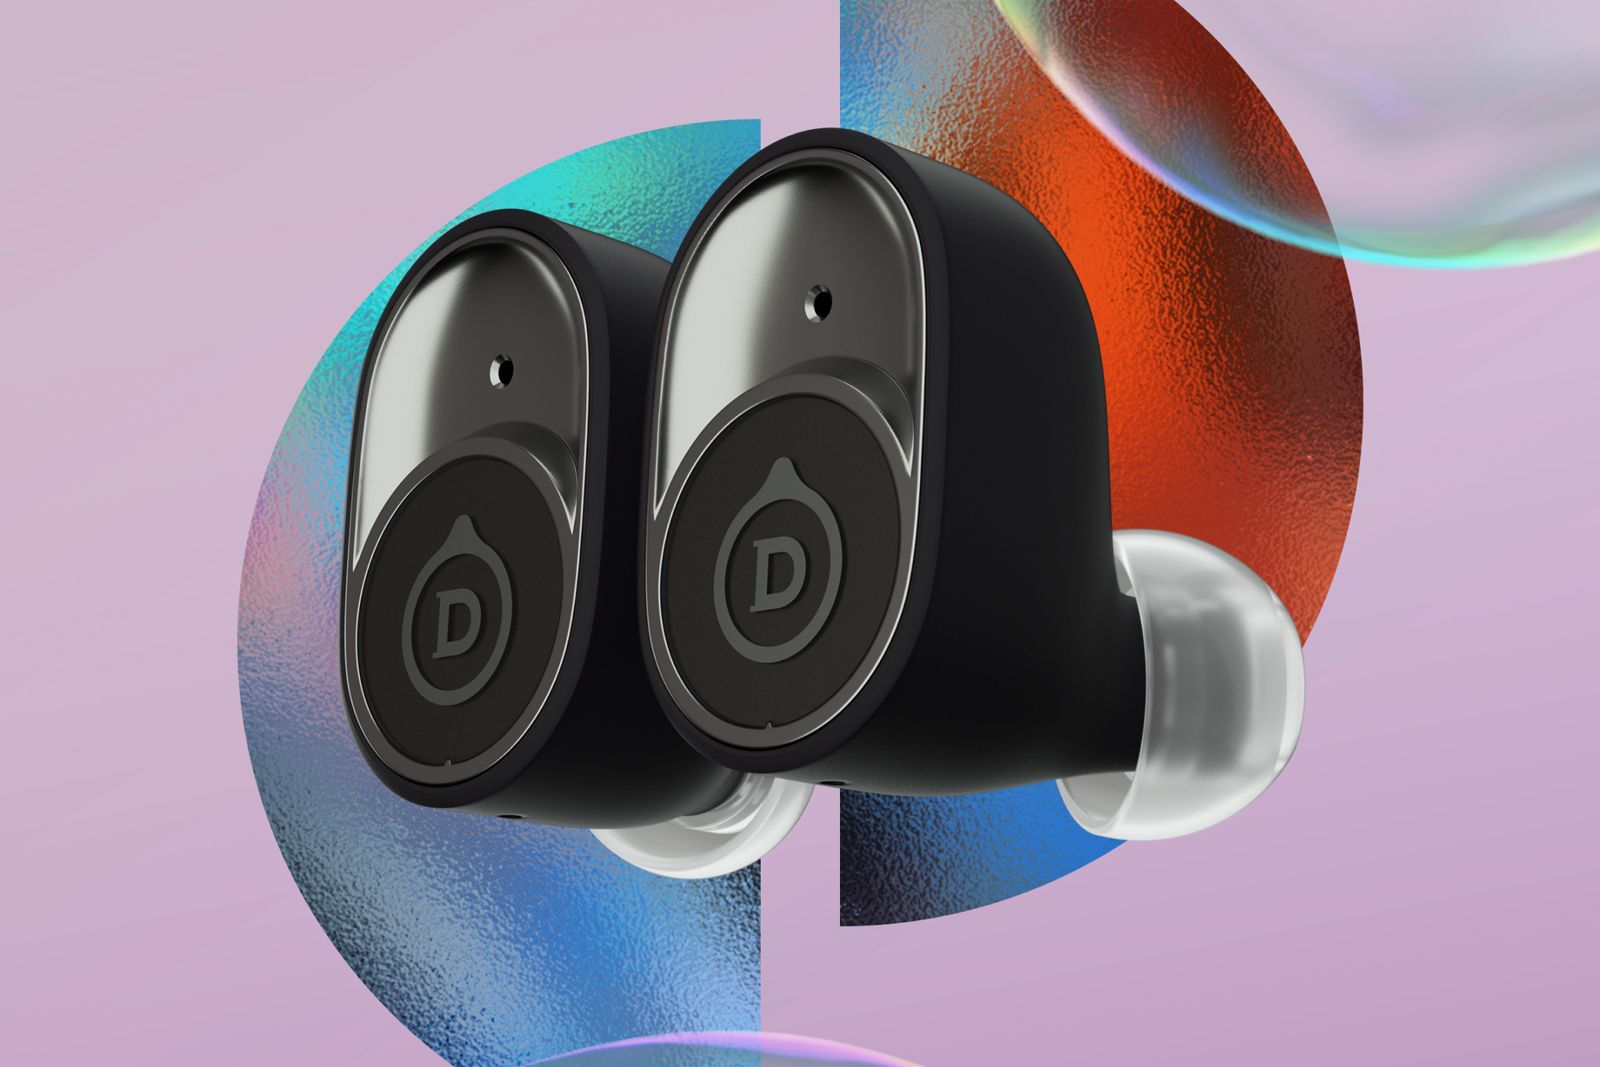 Devialet Gemini are premium true wireless ANC earbuds to take on AirPods Pro photo 3